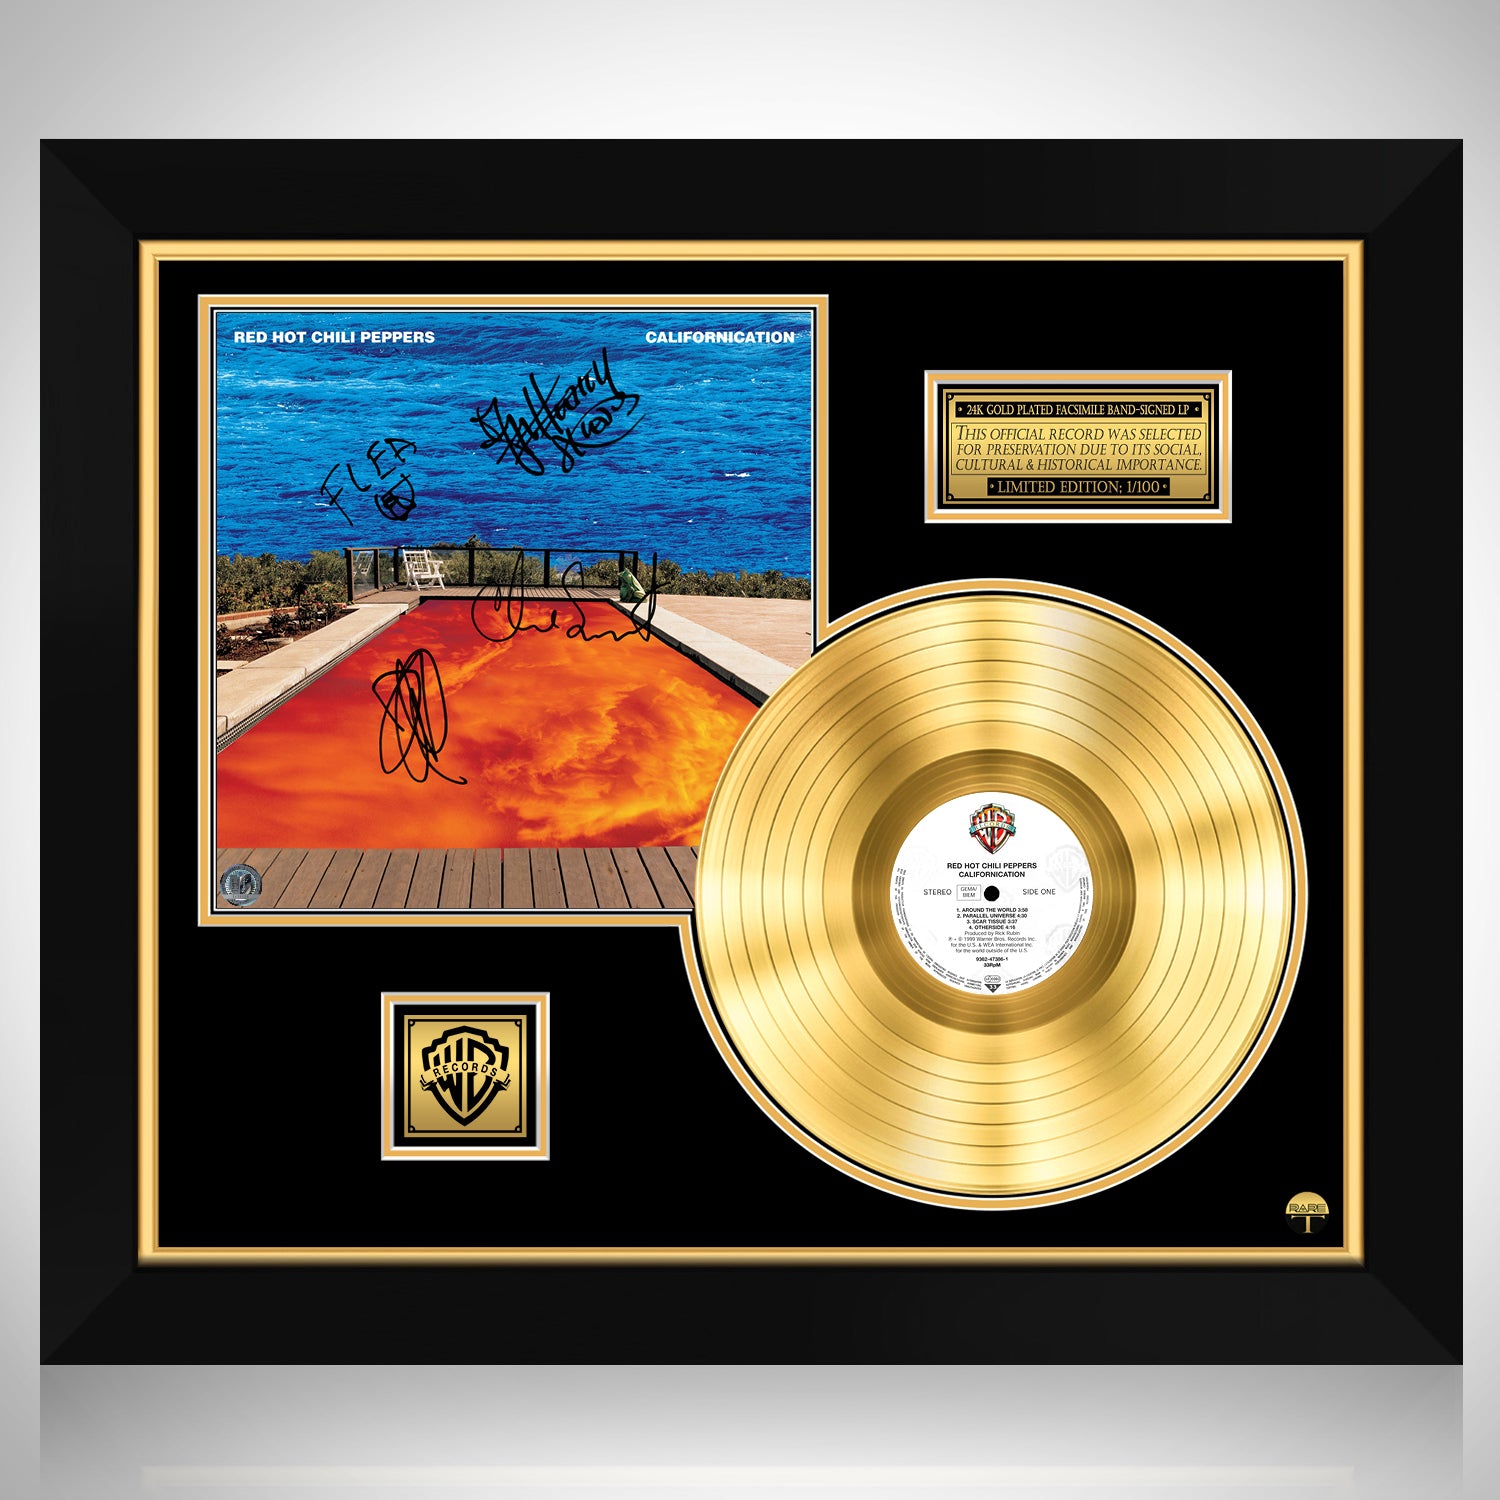 Red Hot Chili Peppers - Californication Gold LP Limited Signature 